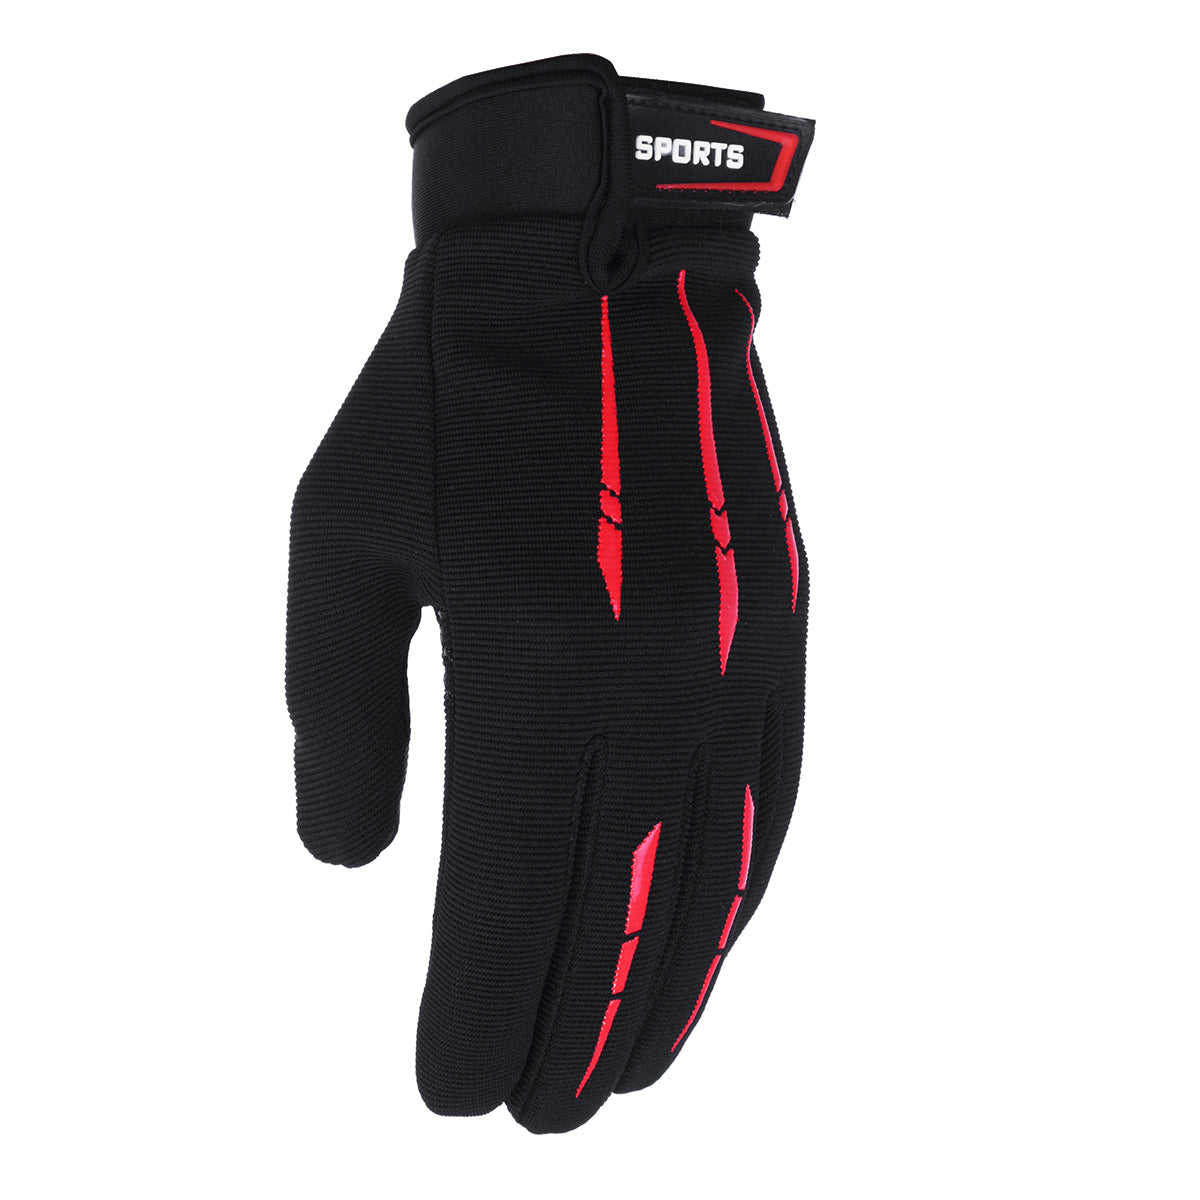 Black Windproof Men Women Touch Screen Gloves Non-Slip Waterproof Winter Warm Cycling Motorcycle Riding Thermal